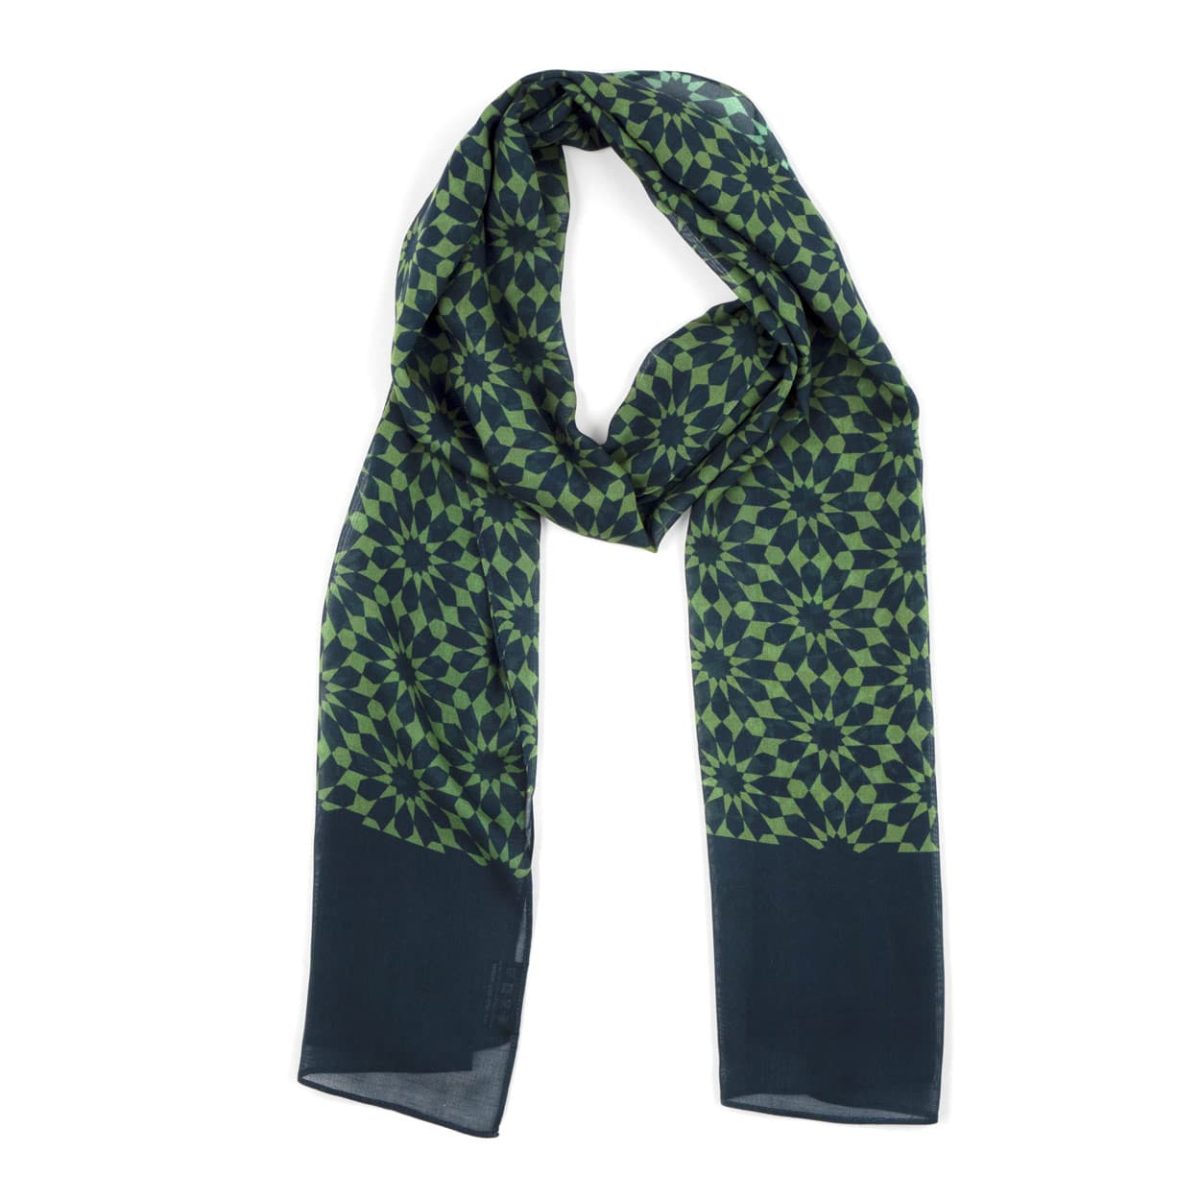 Green scarf for men and women with geometric print